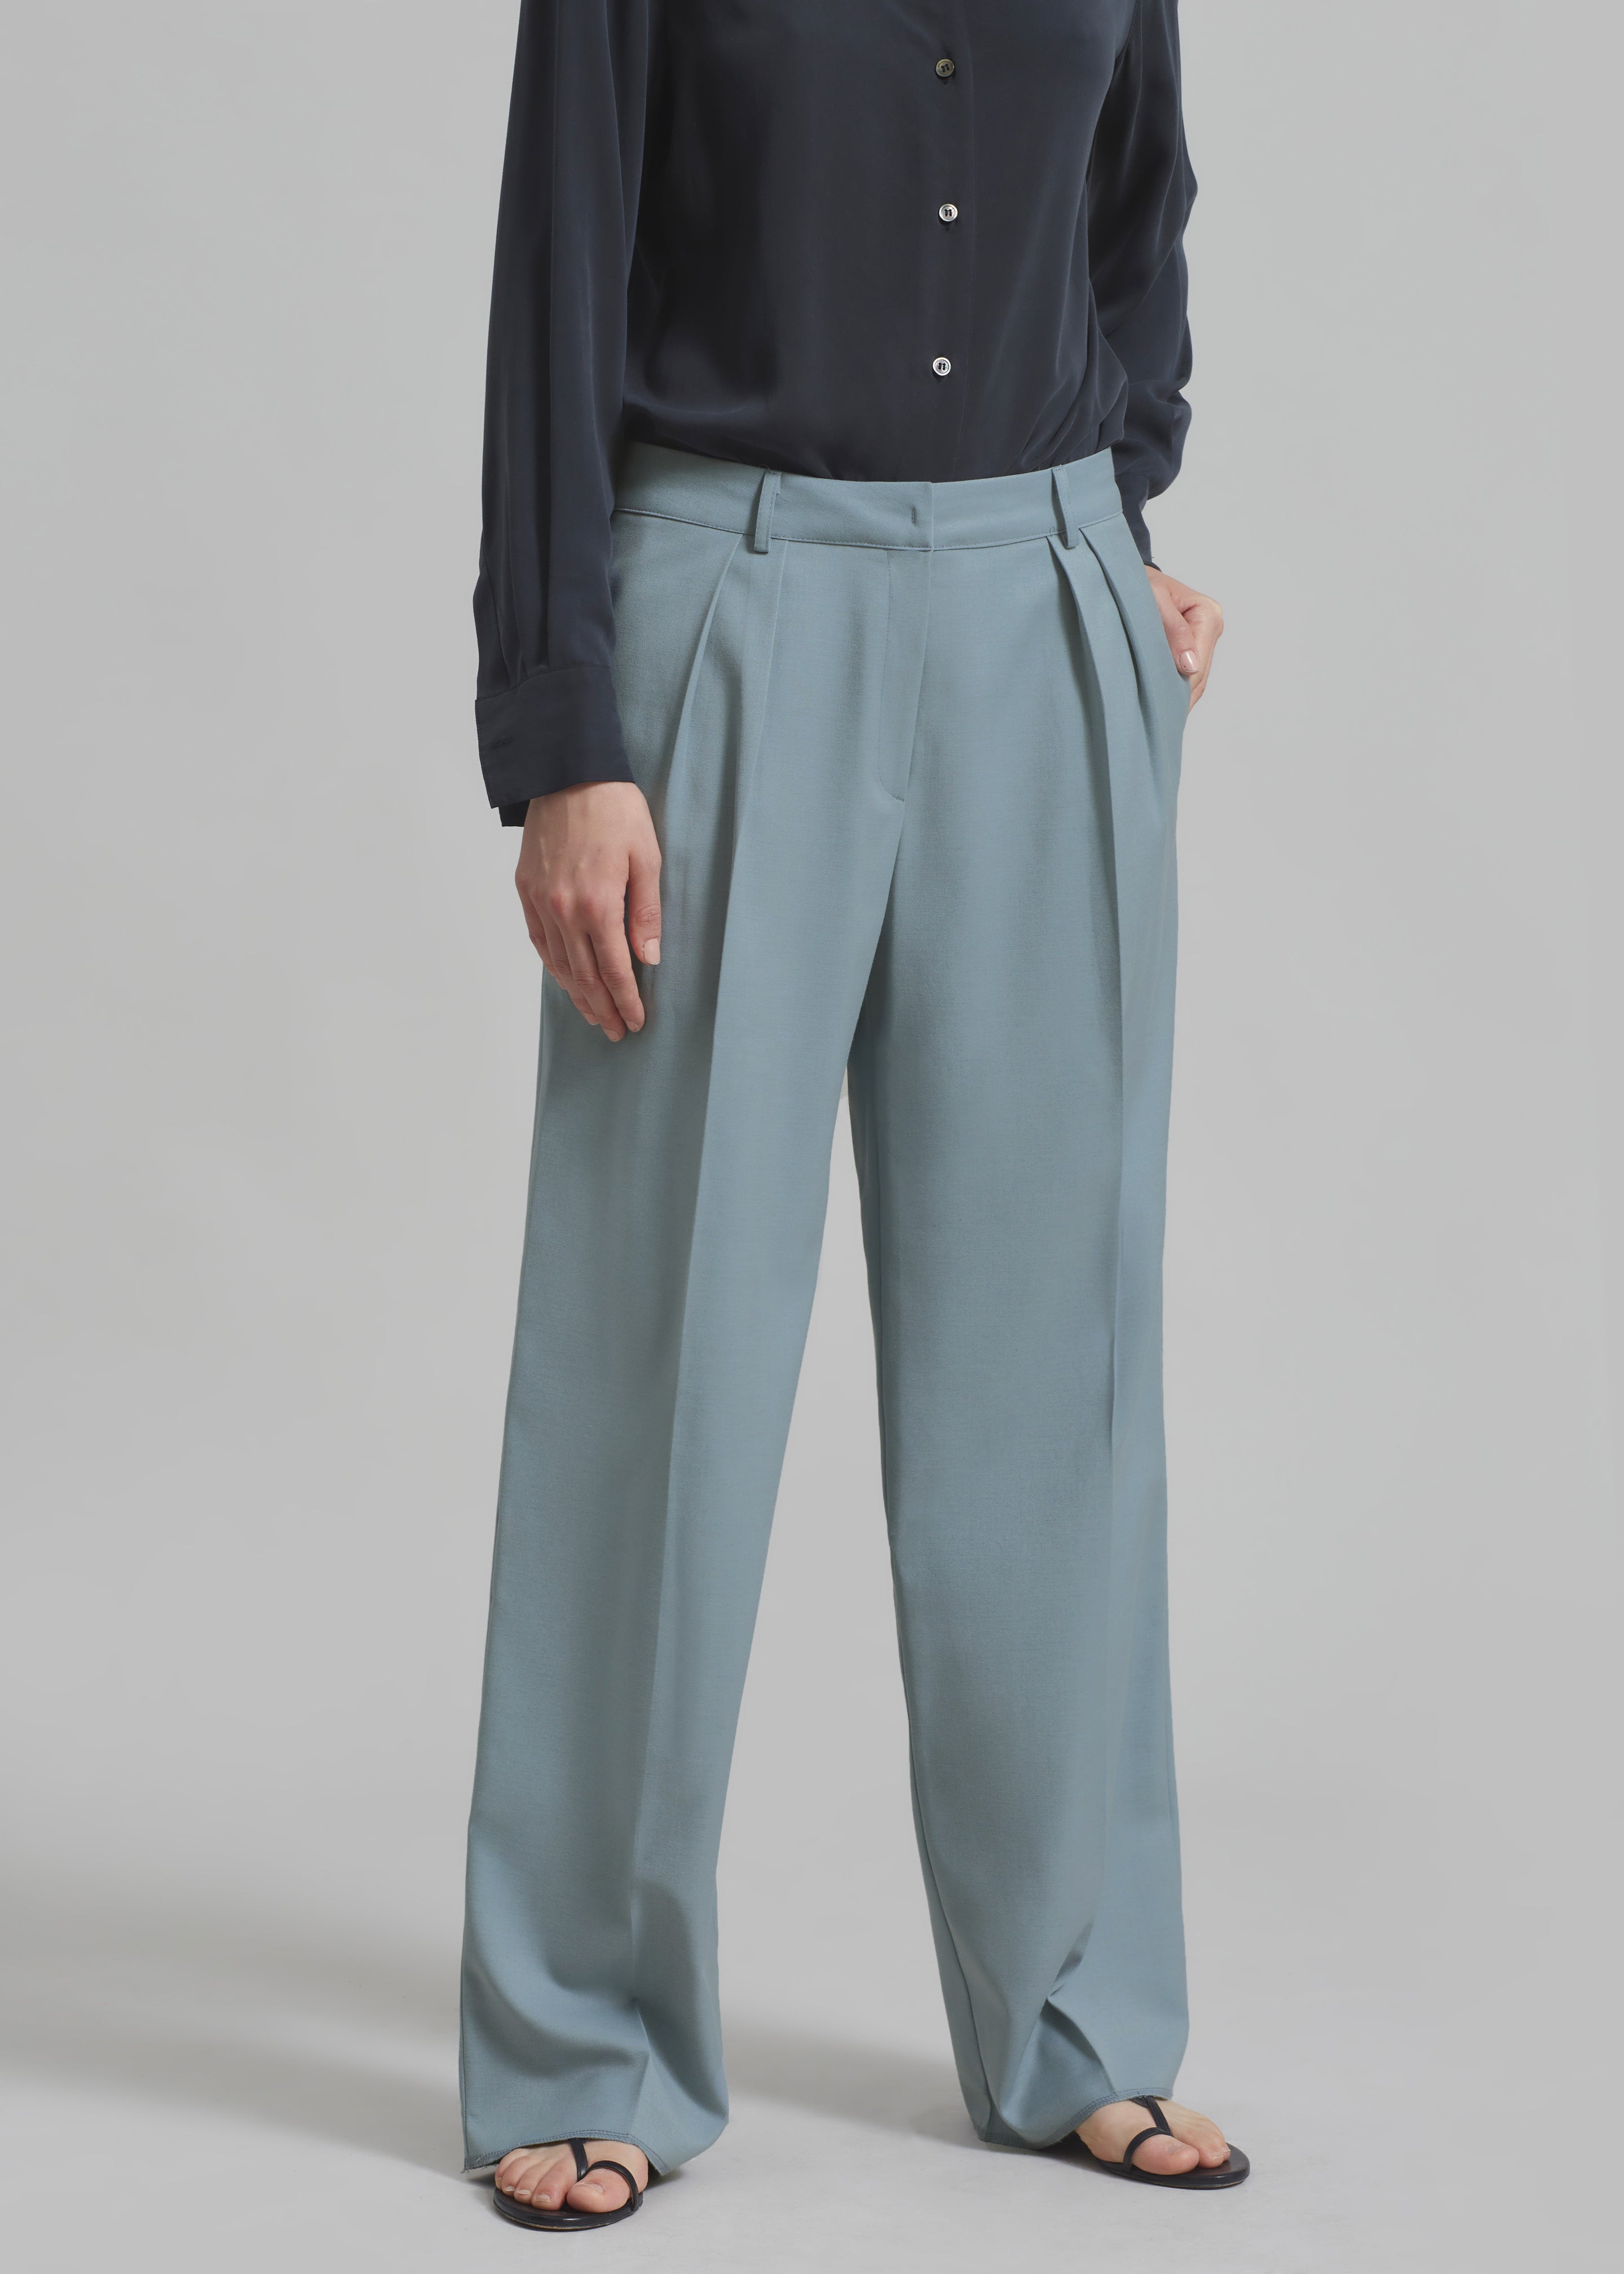 Spencer Pleated Pants - Dusty Blue - 7